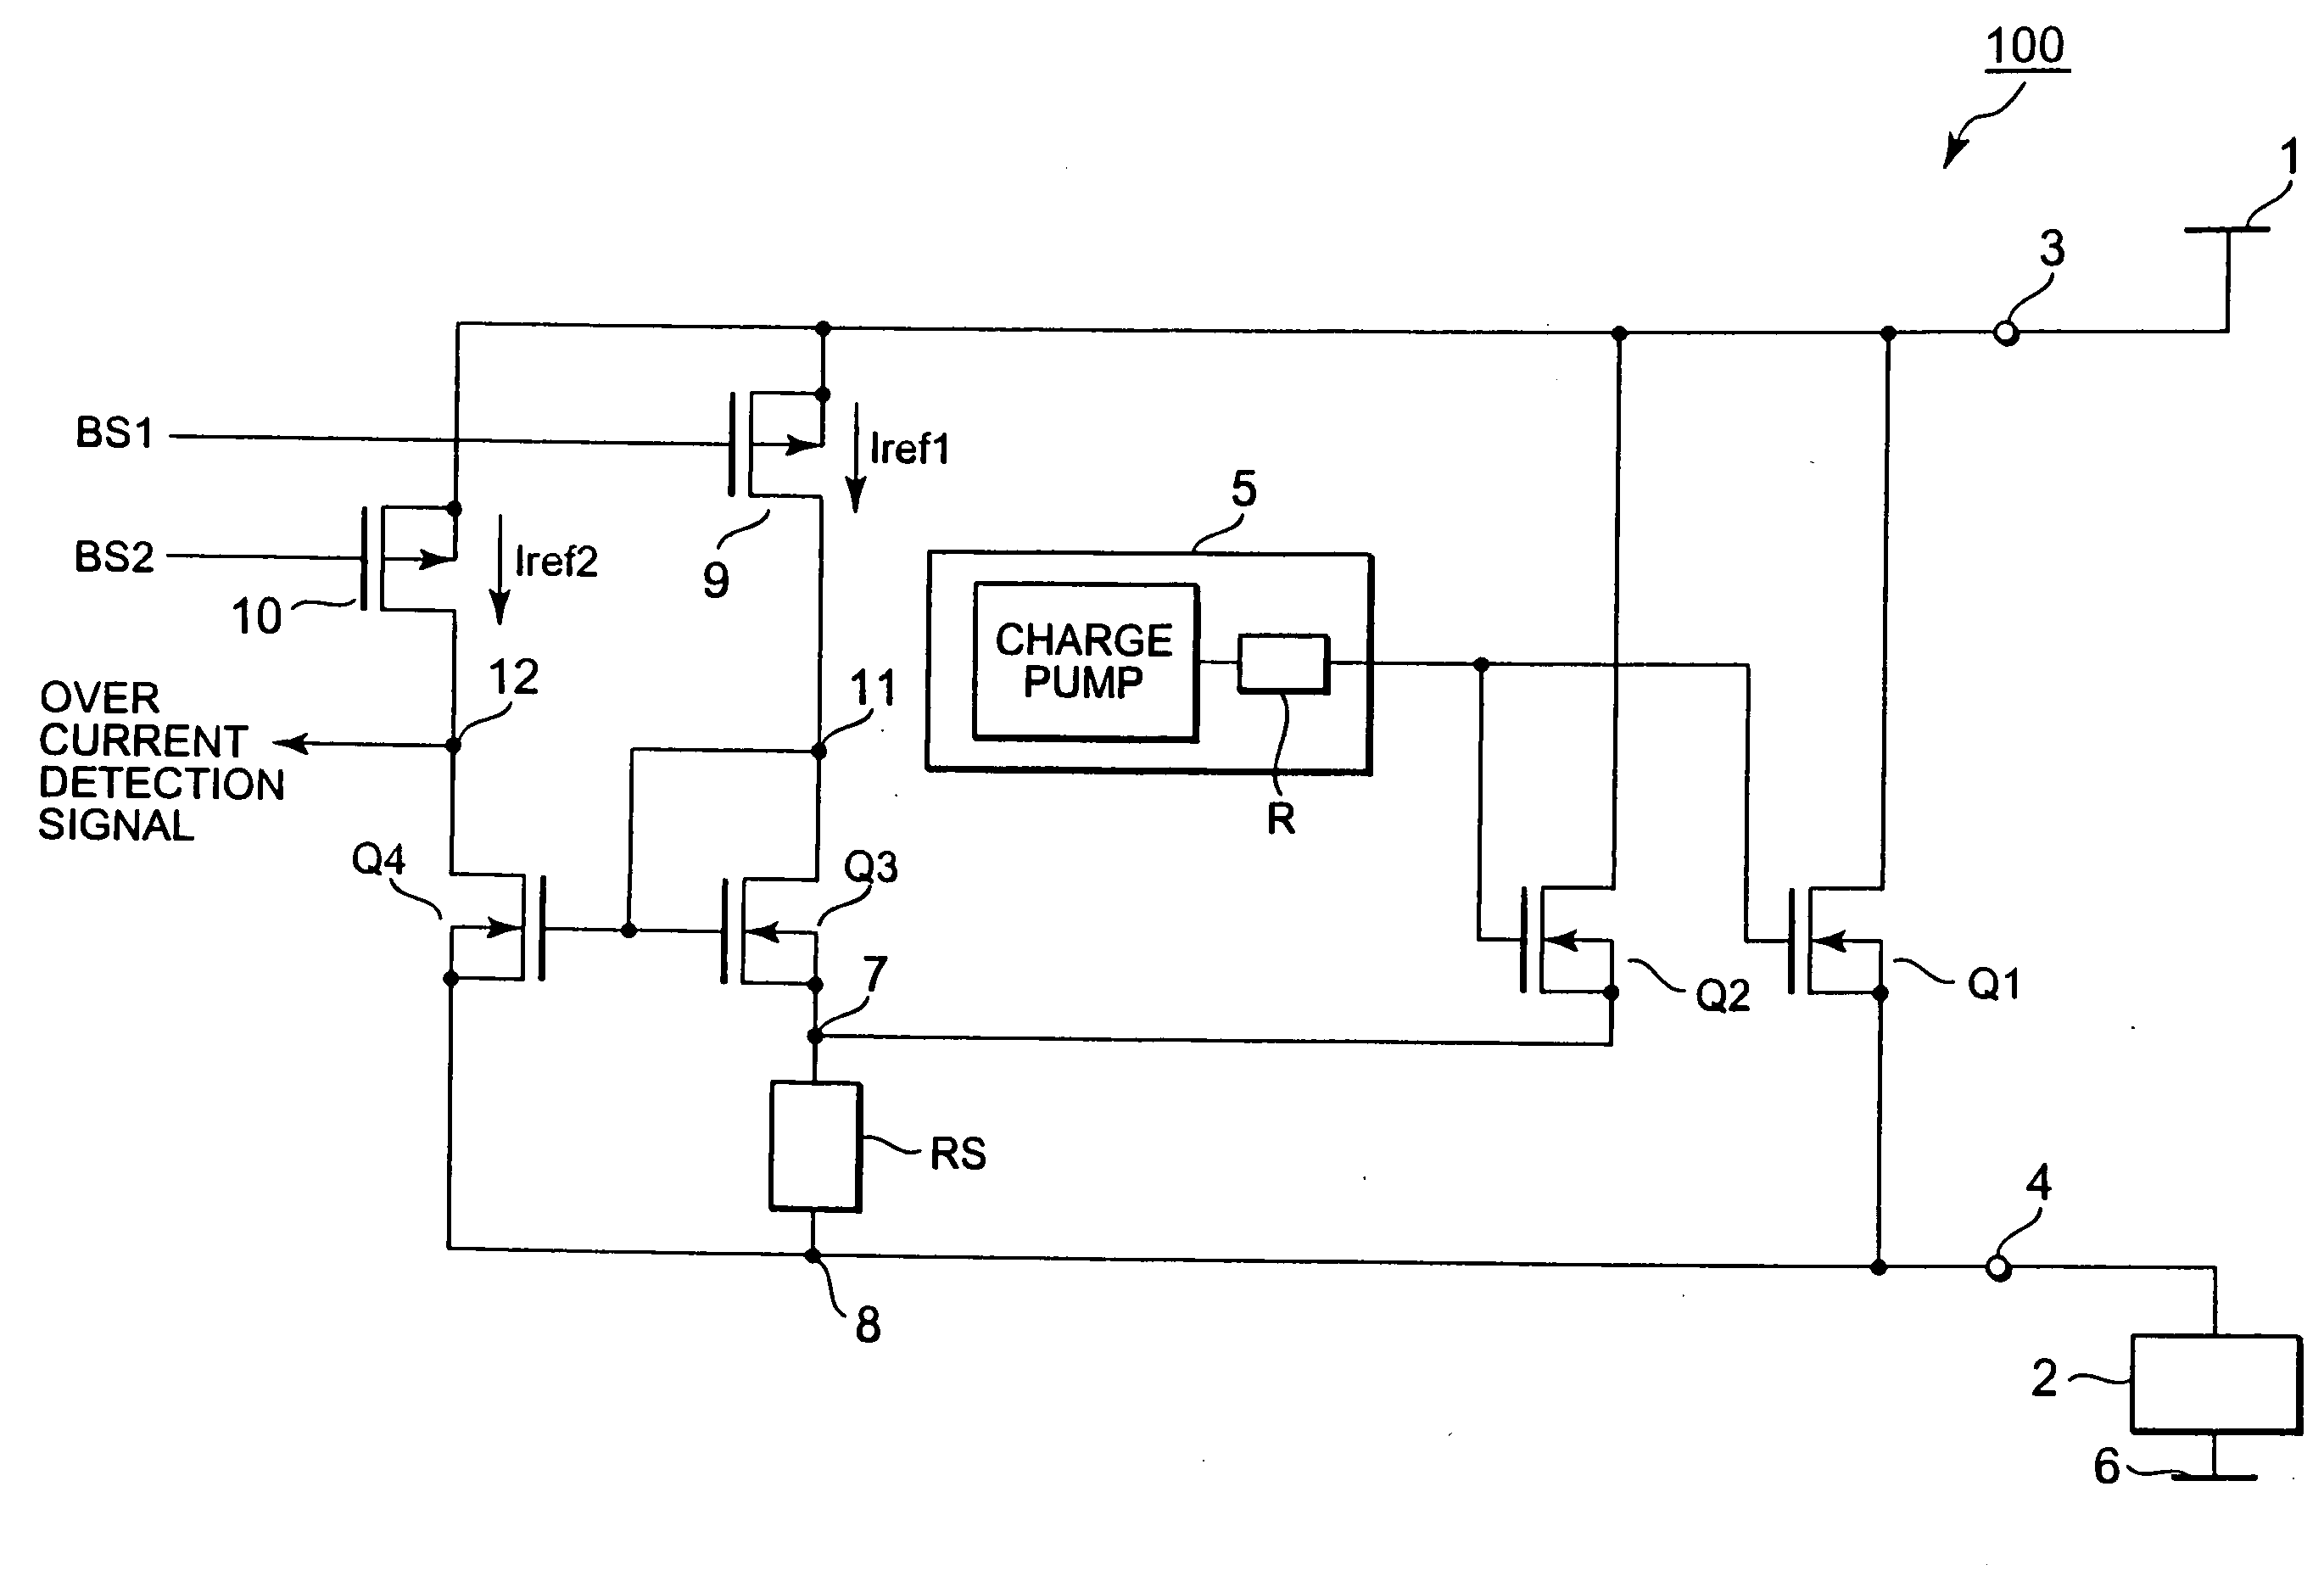 Power supply control apparatus including overcurrent detection circuit